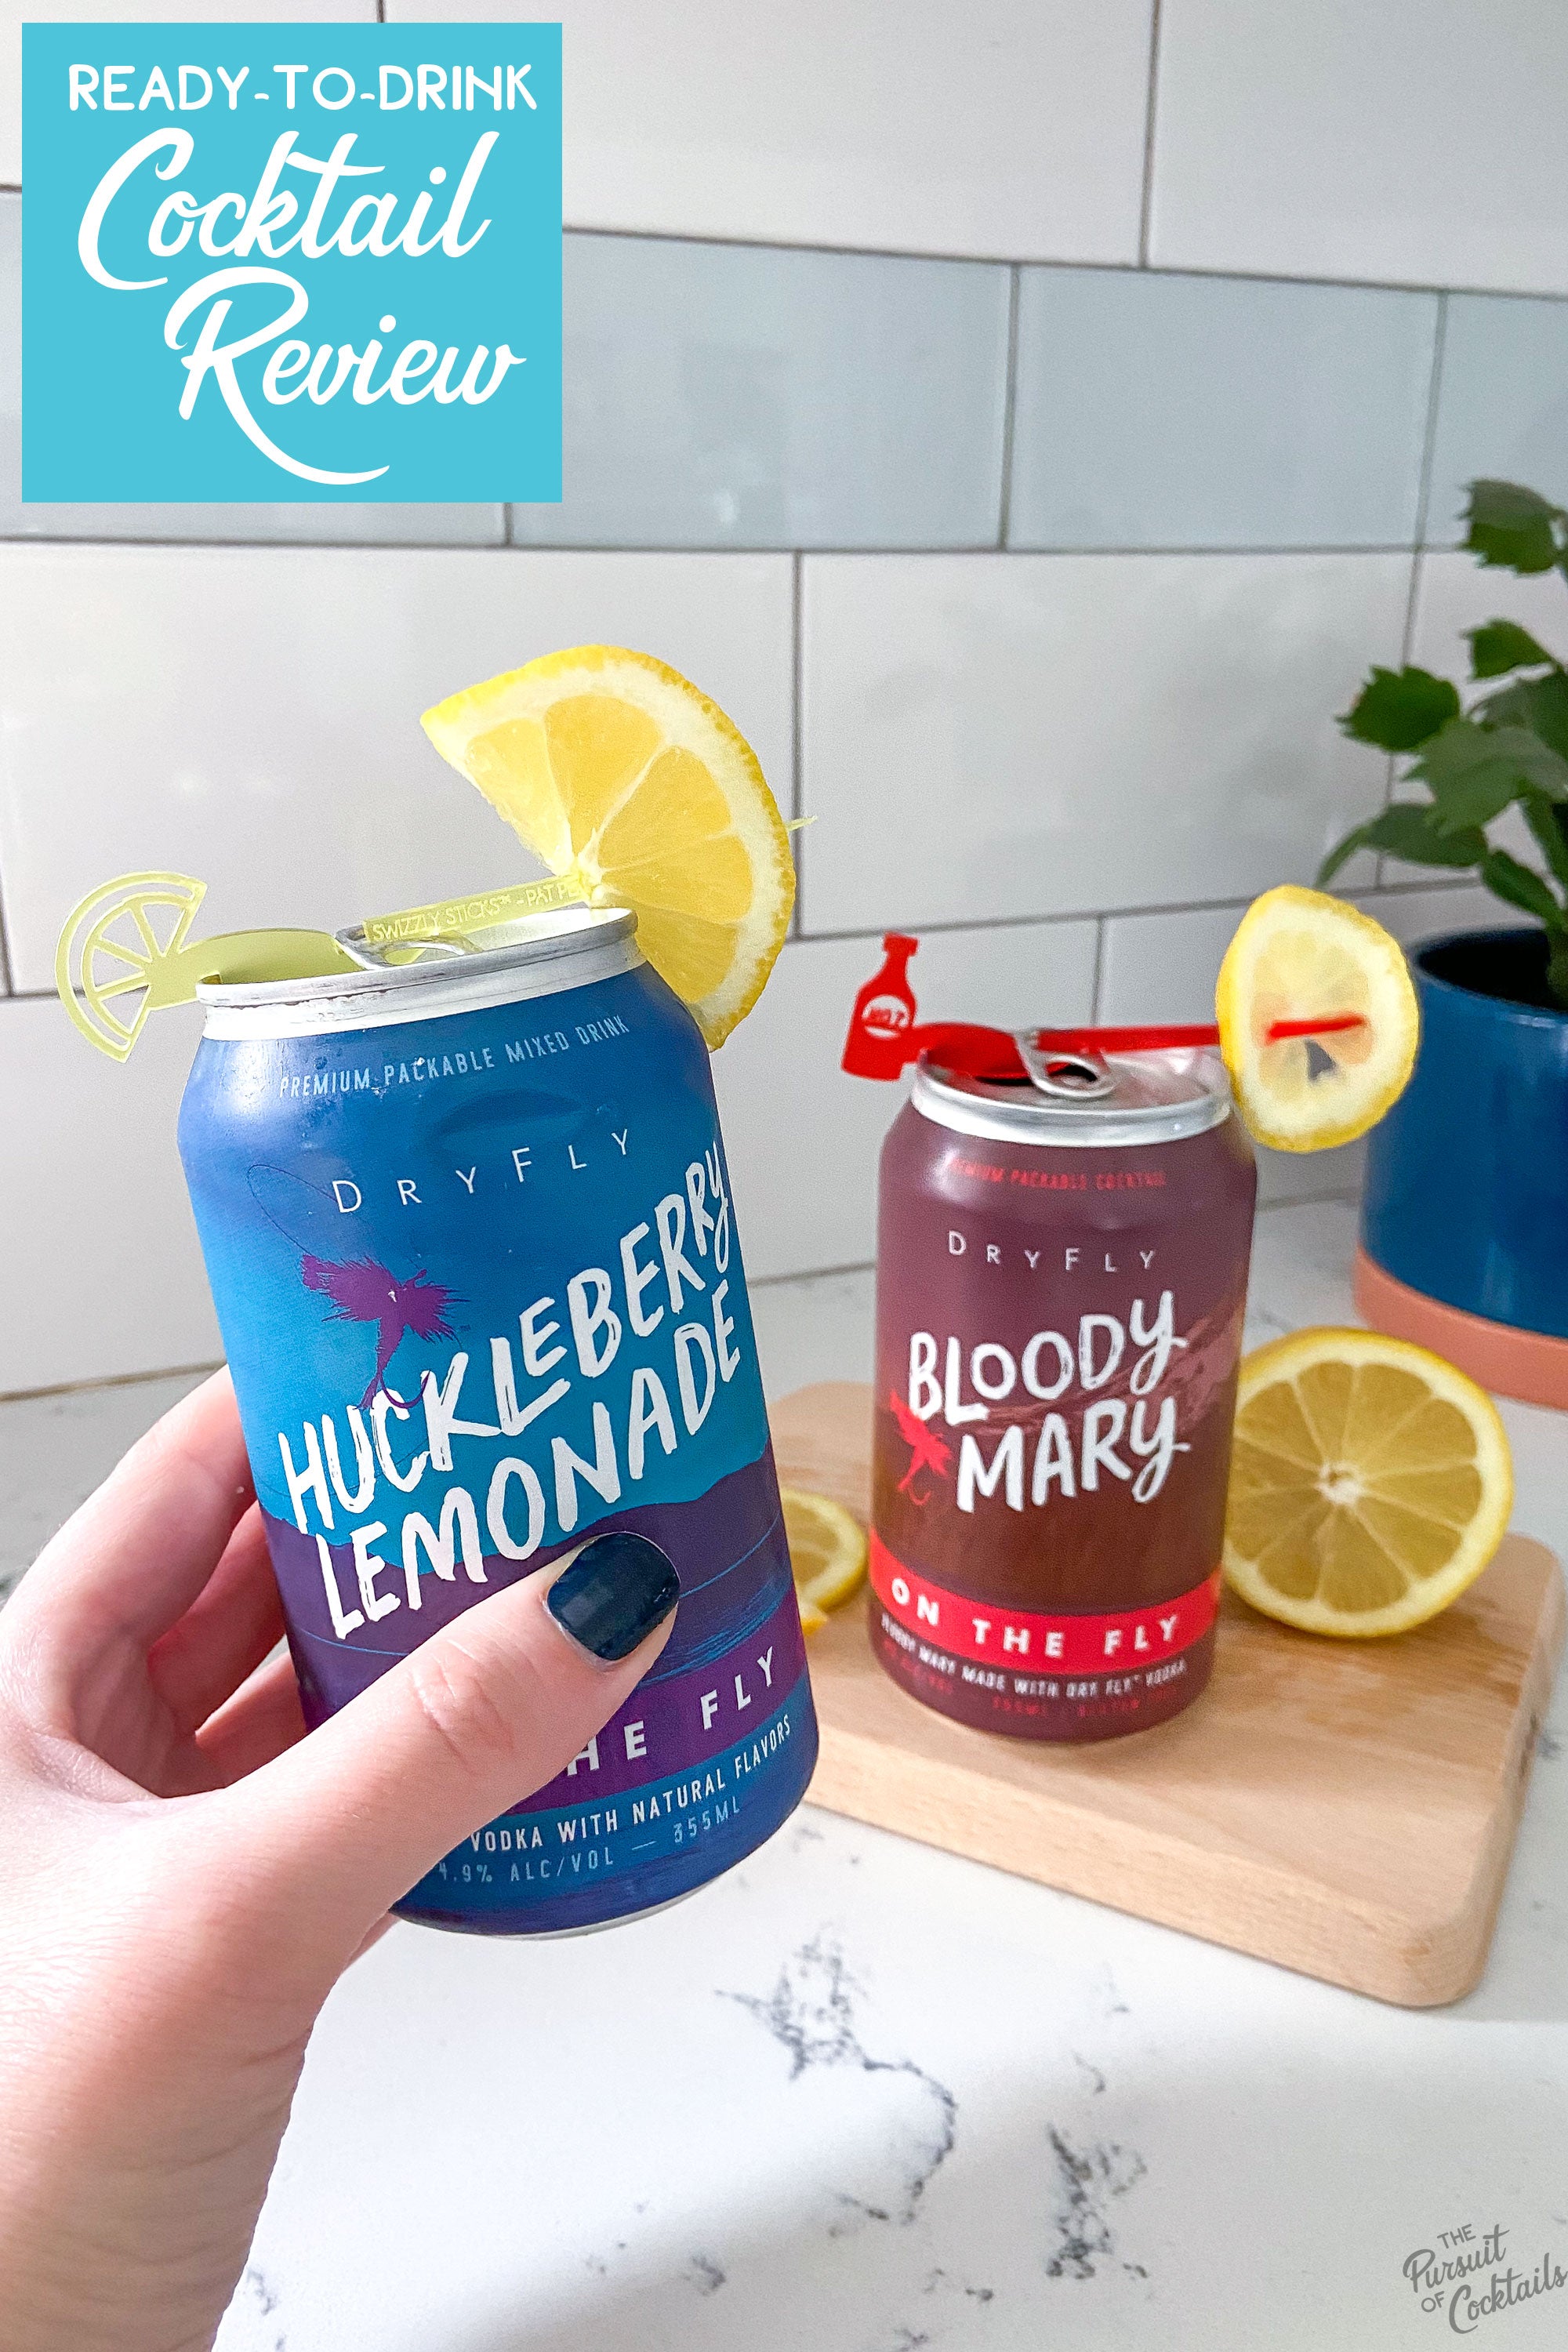 Dry Fly Distilling canned cocktail review of their Huckleberry Lemonade and Bloody Mary cocktails